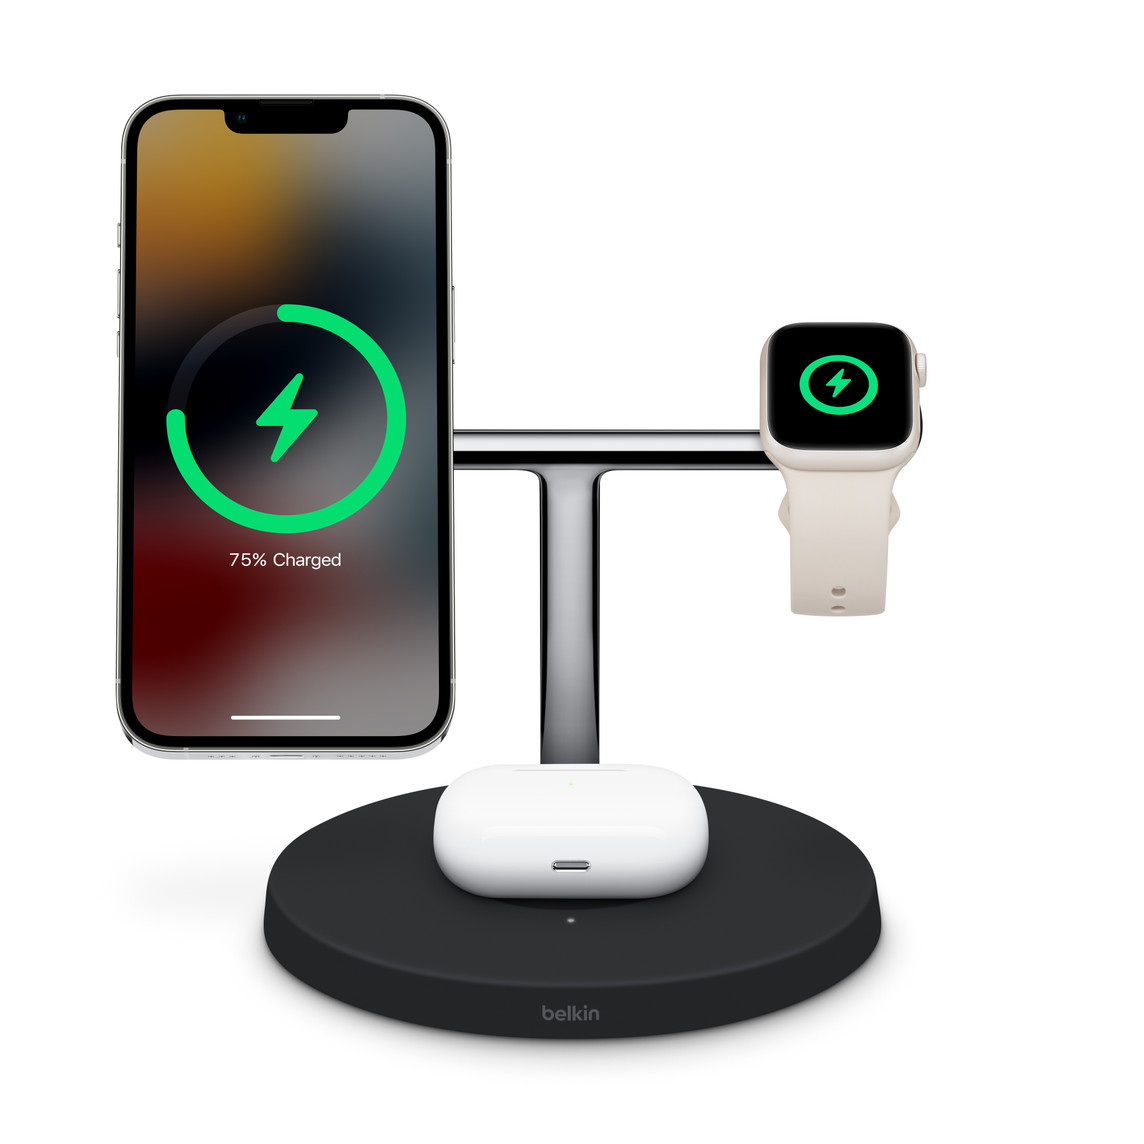 Belkin Boost Charge Pro 3-in-1 Wireless Charger with MagSafeは、iPhone、Apple Watch、AirPodsワイヤレス充電ケースを同時に充電できる。